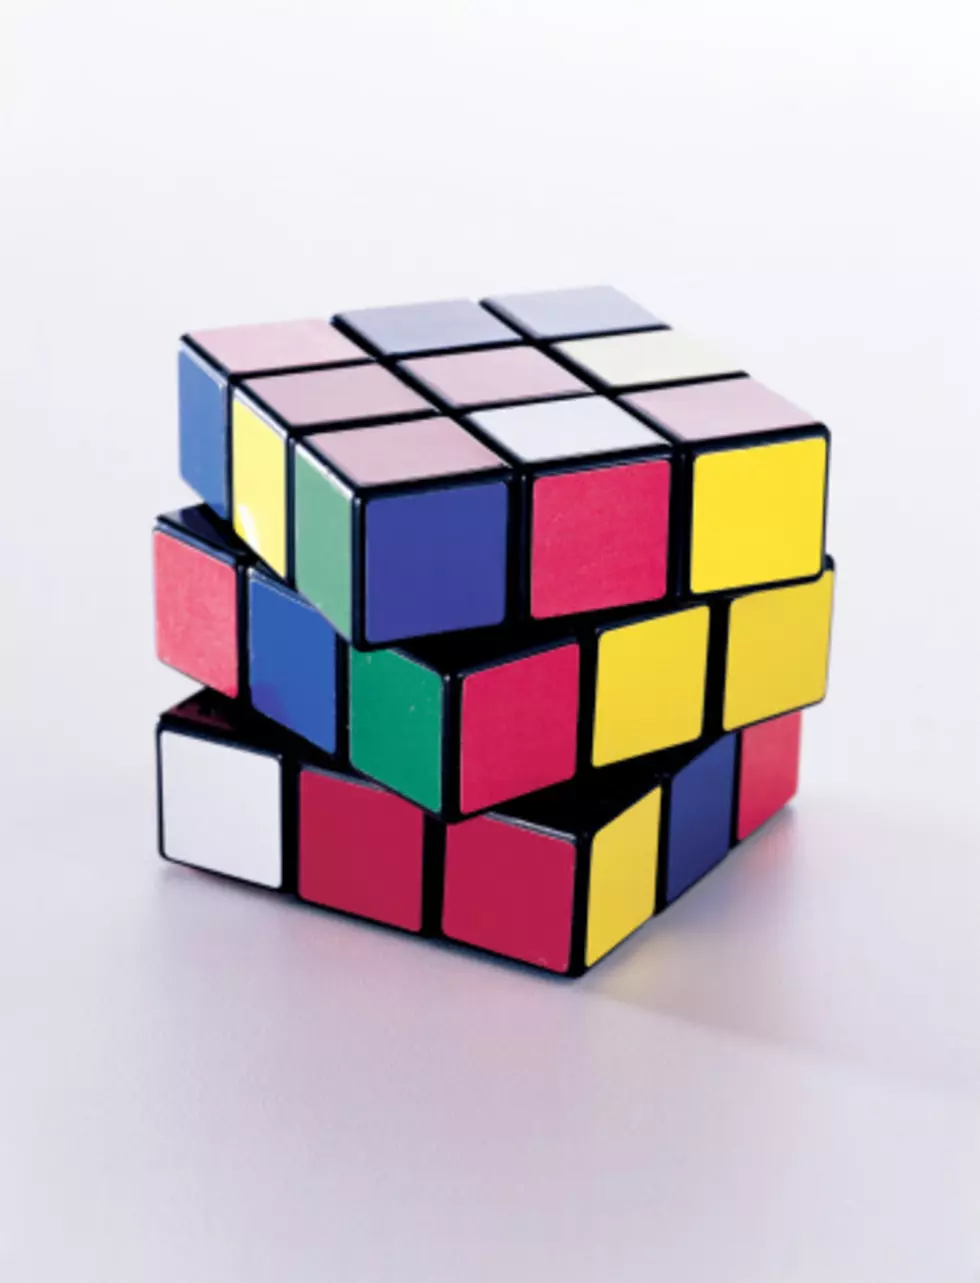 Today Is The 40th Anniversary Of The Debut Of Rubik&#8217;s Cube And Here&#8217;s How To Solve It [VIDEO]